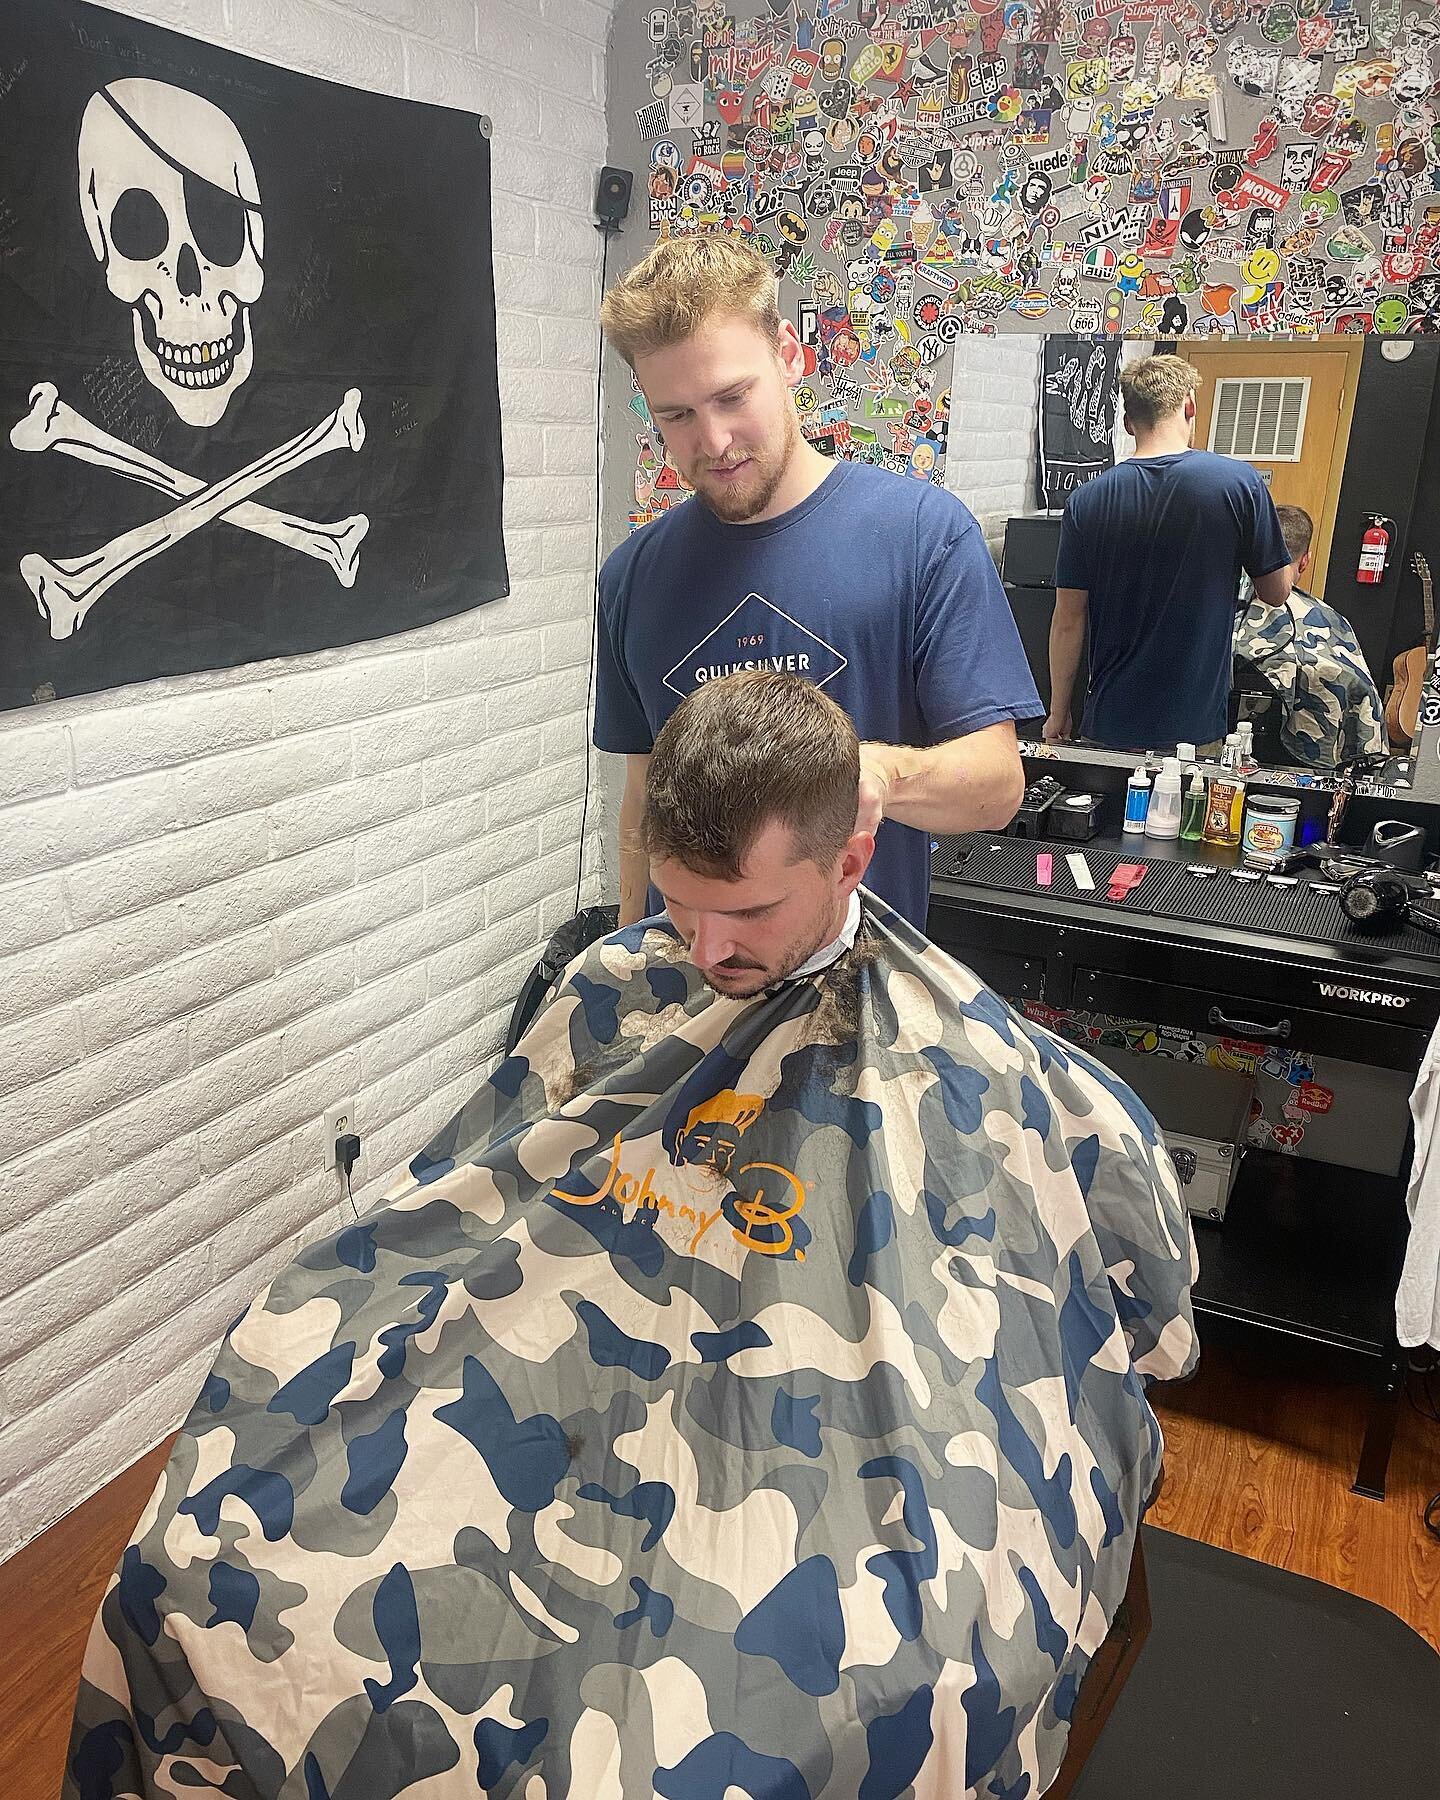 We would like to take a minute to welcome Joe Honomichl @your_boy_joe171 to the shop! His books are open and you can get an appointment with him through the website! 
#AnvilBarberCo #JustABarbershop #barbershop #americanfork #utahcounty #barber #book